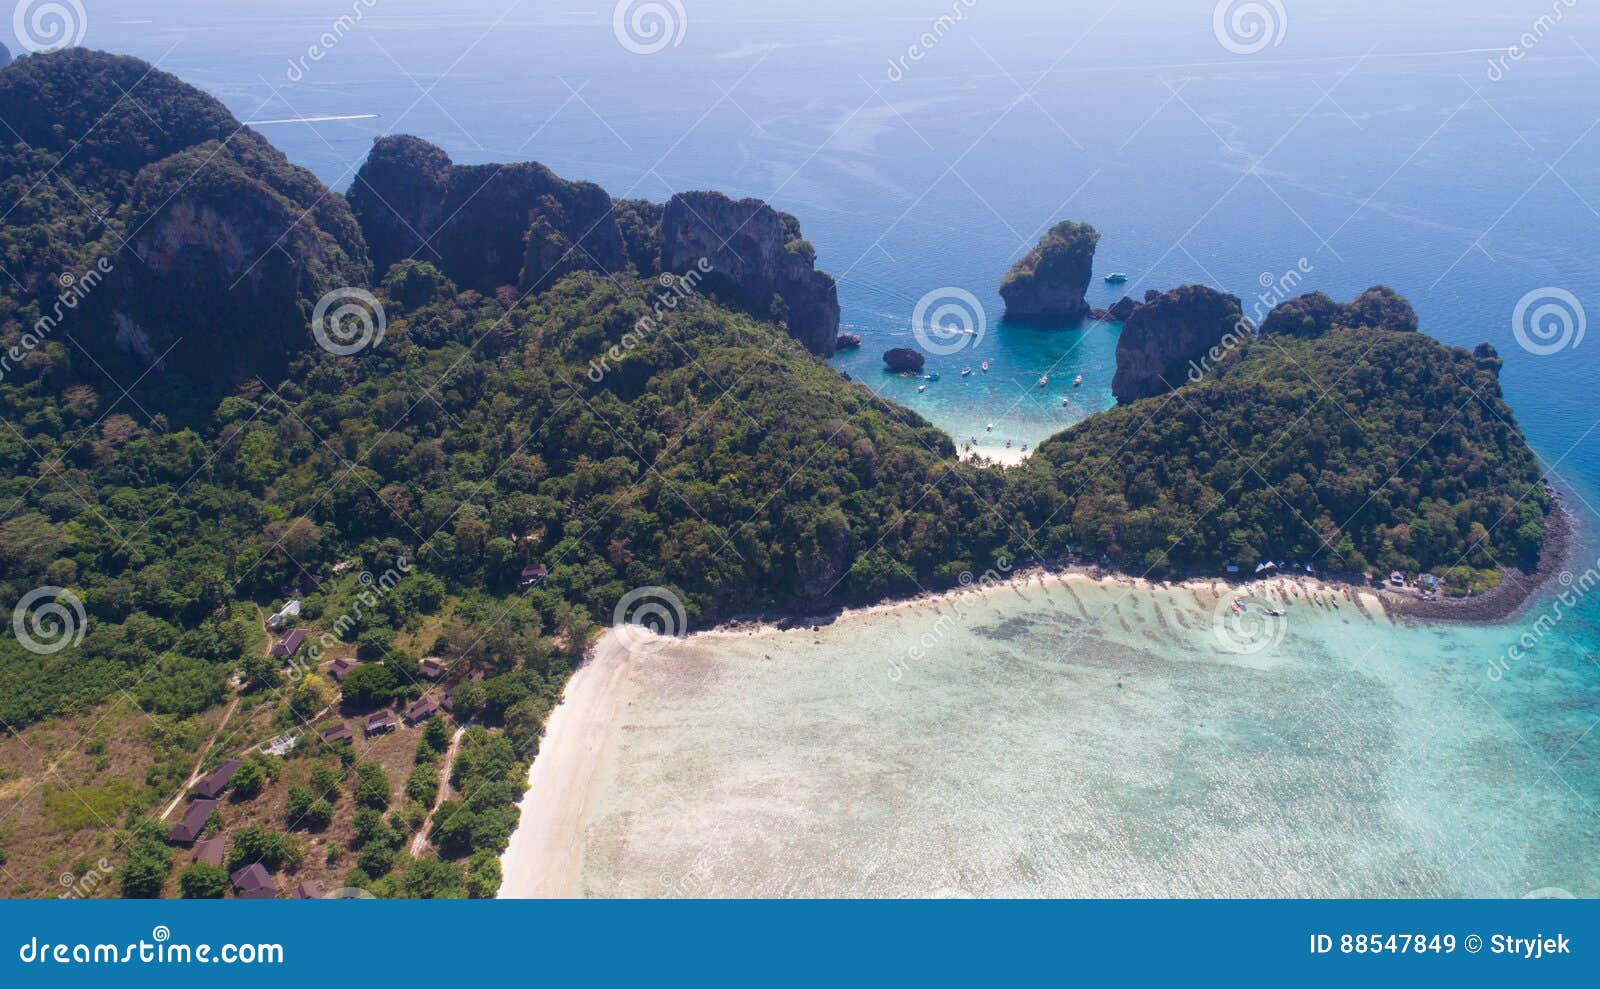 aerial drone photo of loh lana bay and nui bay beach, part of iconic tropical phi phi island